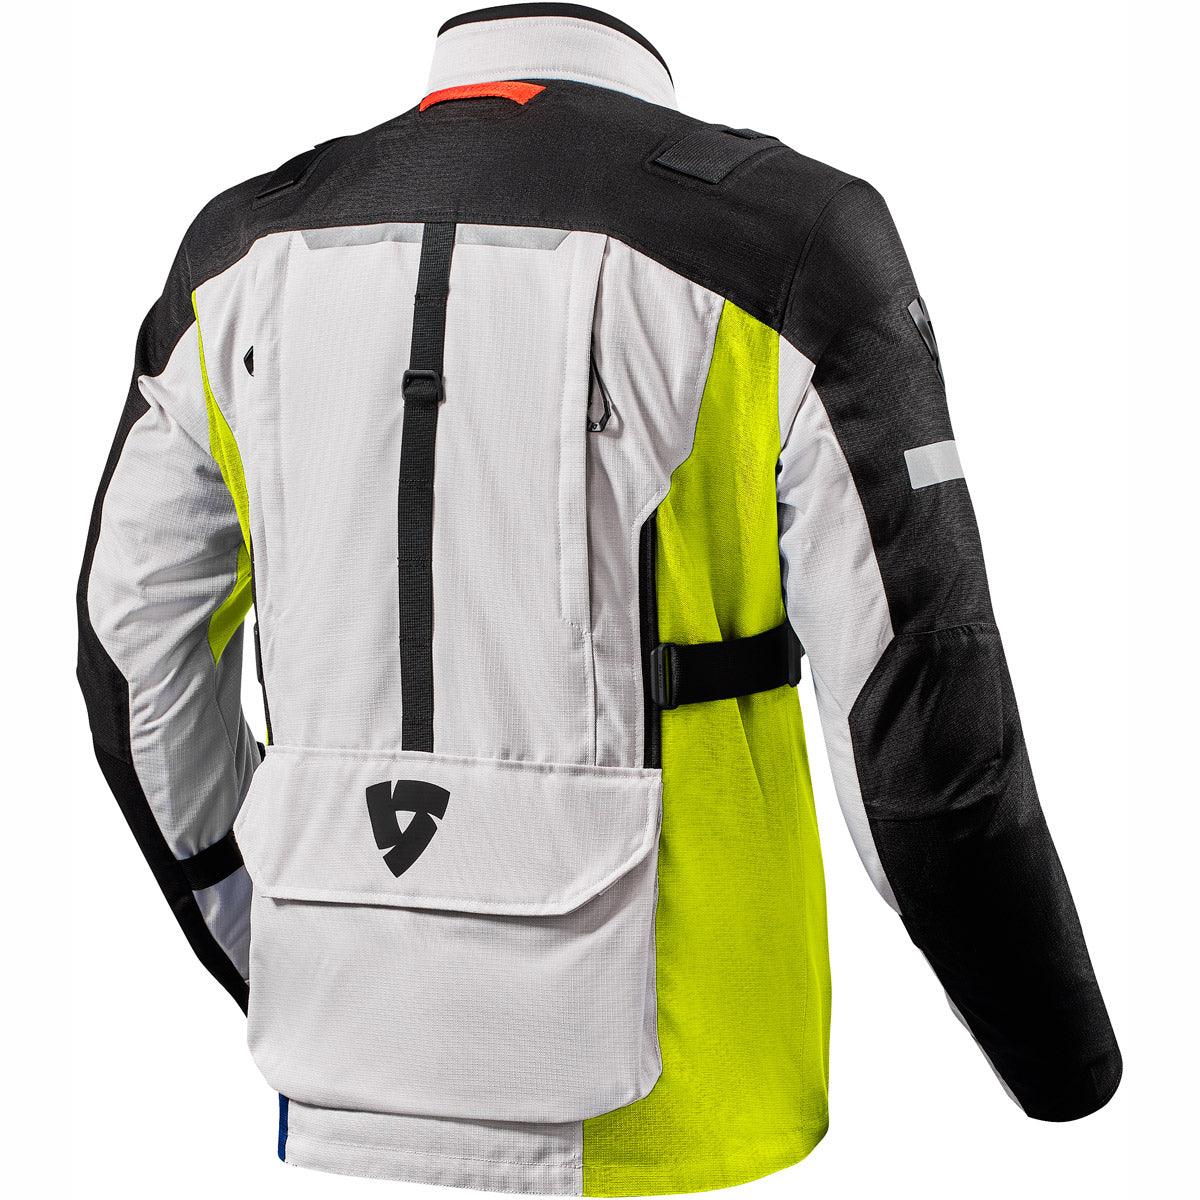 Rev It Sand 4 Jacket 3L H2O WP Silver Neon Yel - Motorcycle Clothing